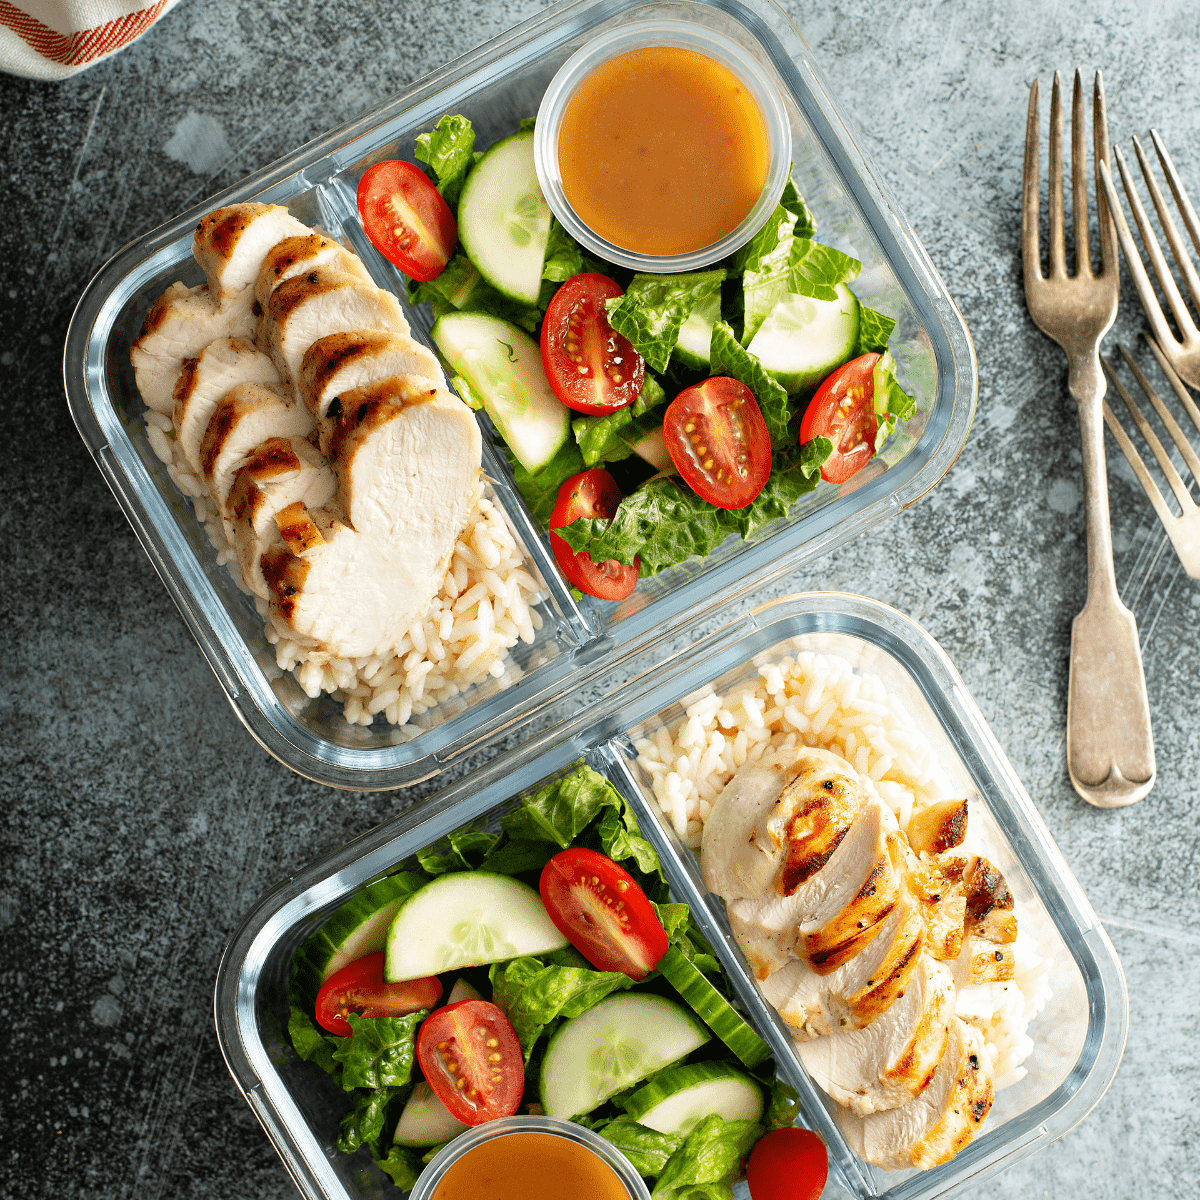 How to Prepare Meal Prep Bowls - Organize Yourself Skinny